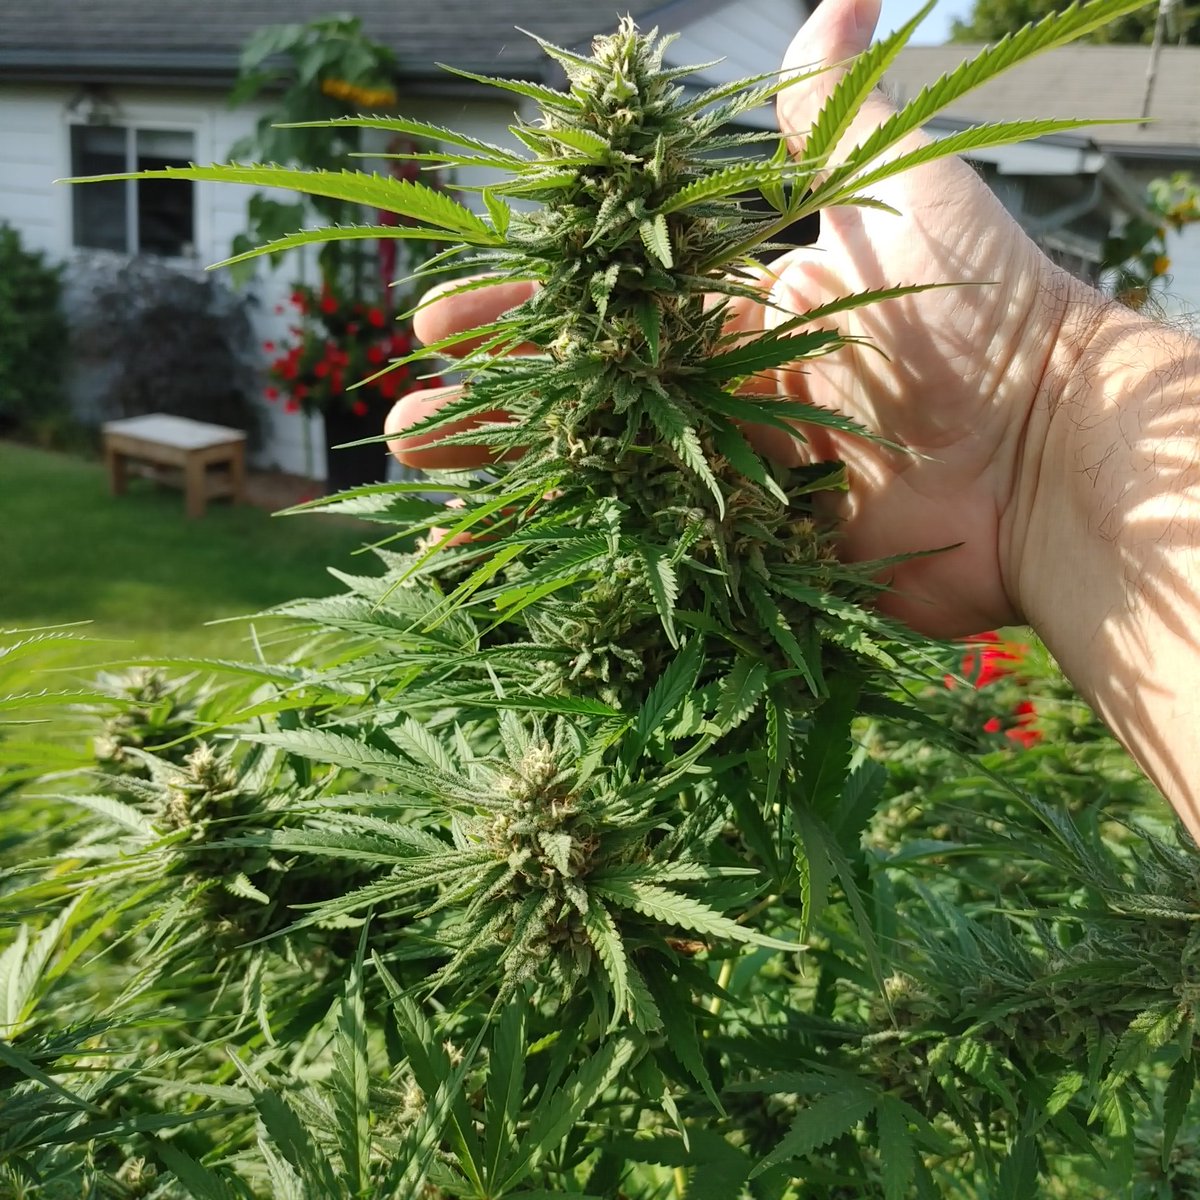 Couple more weeks and harvest